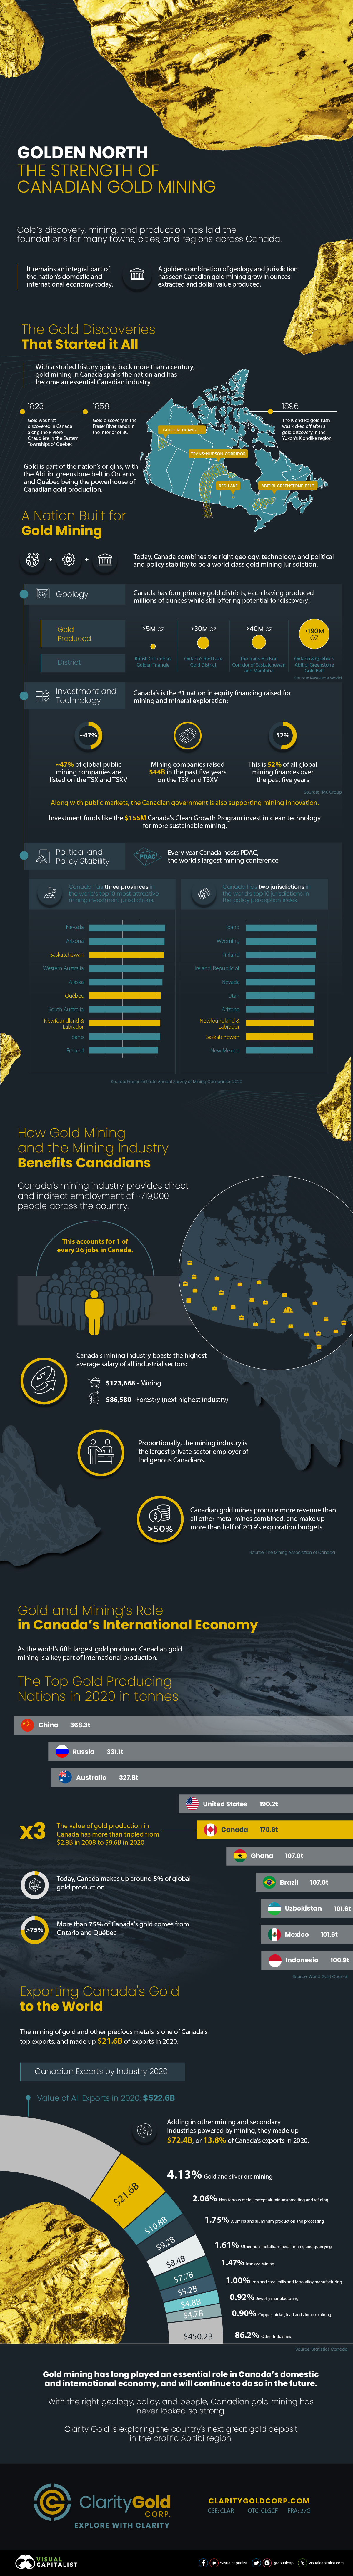 The Strength of Canadian Gold Mining